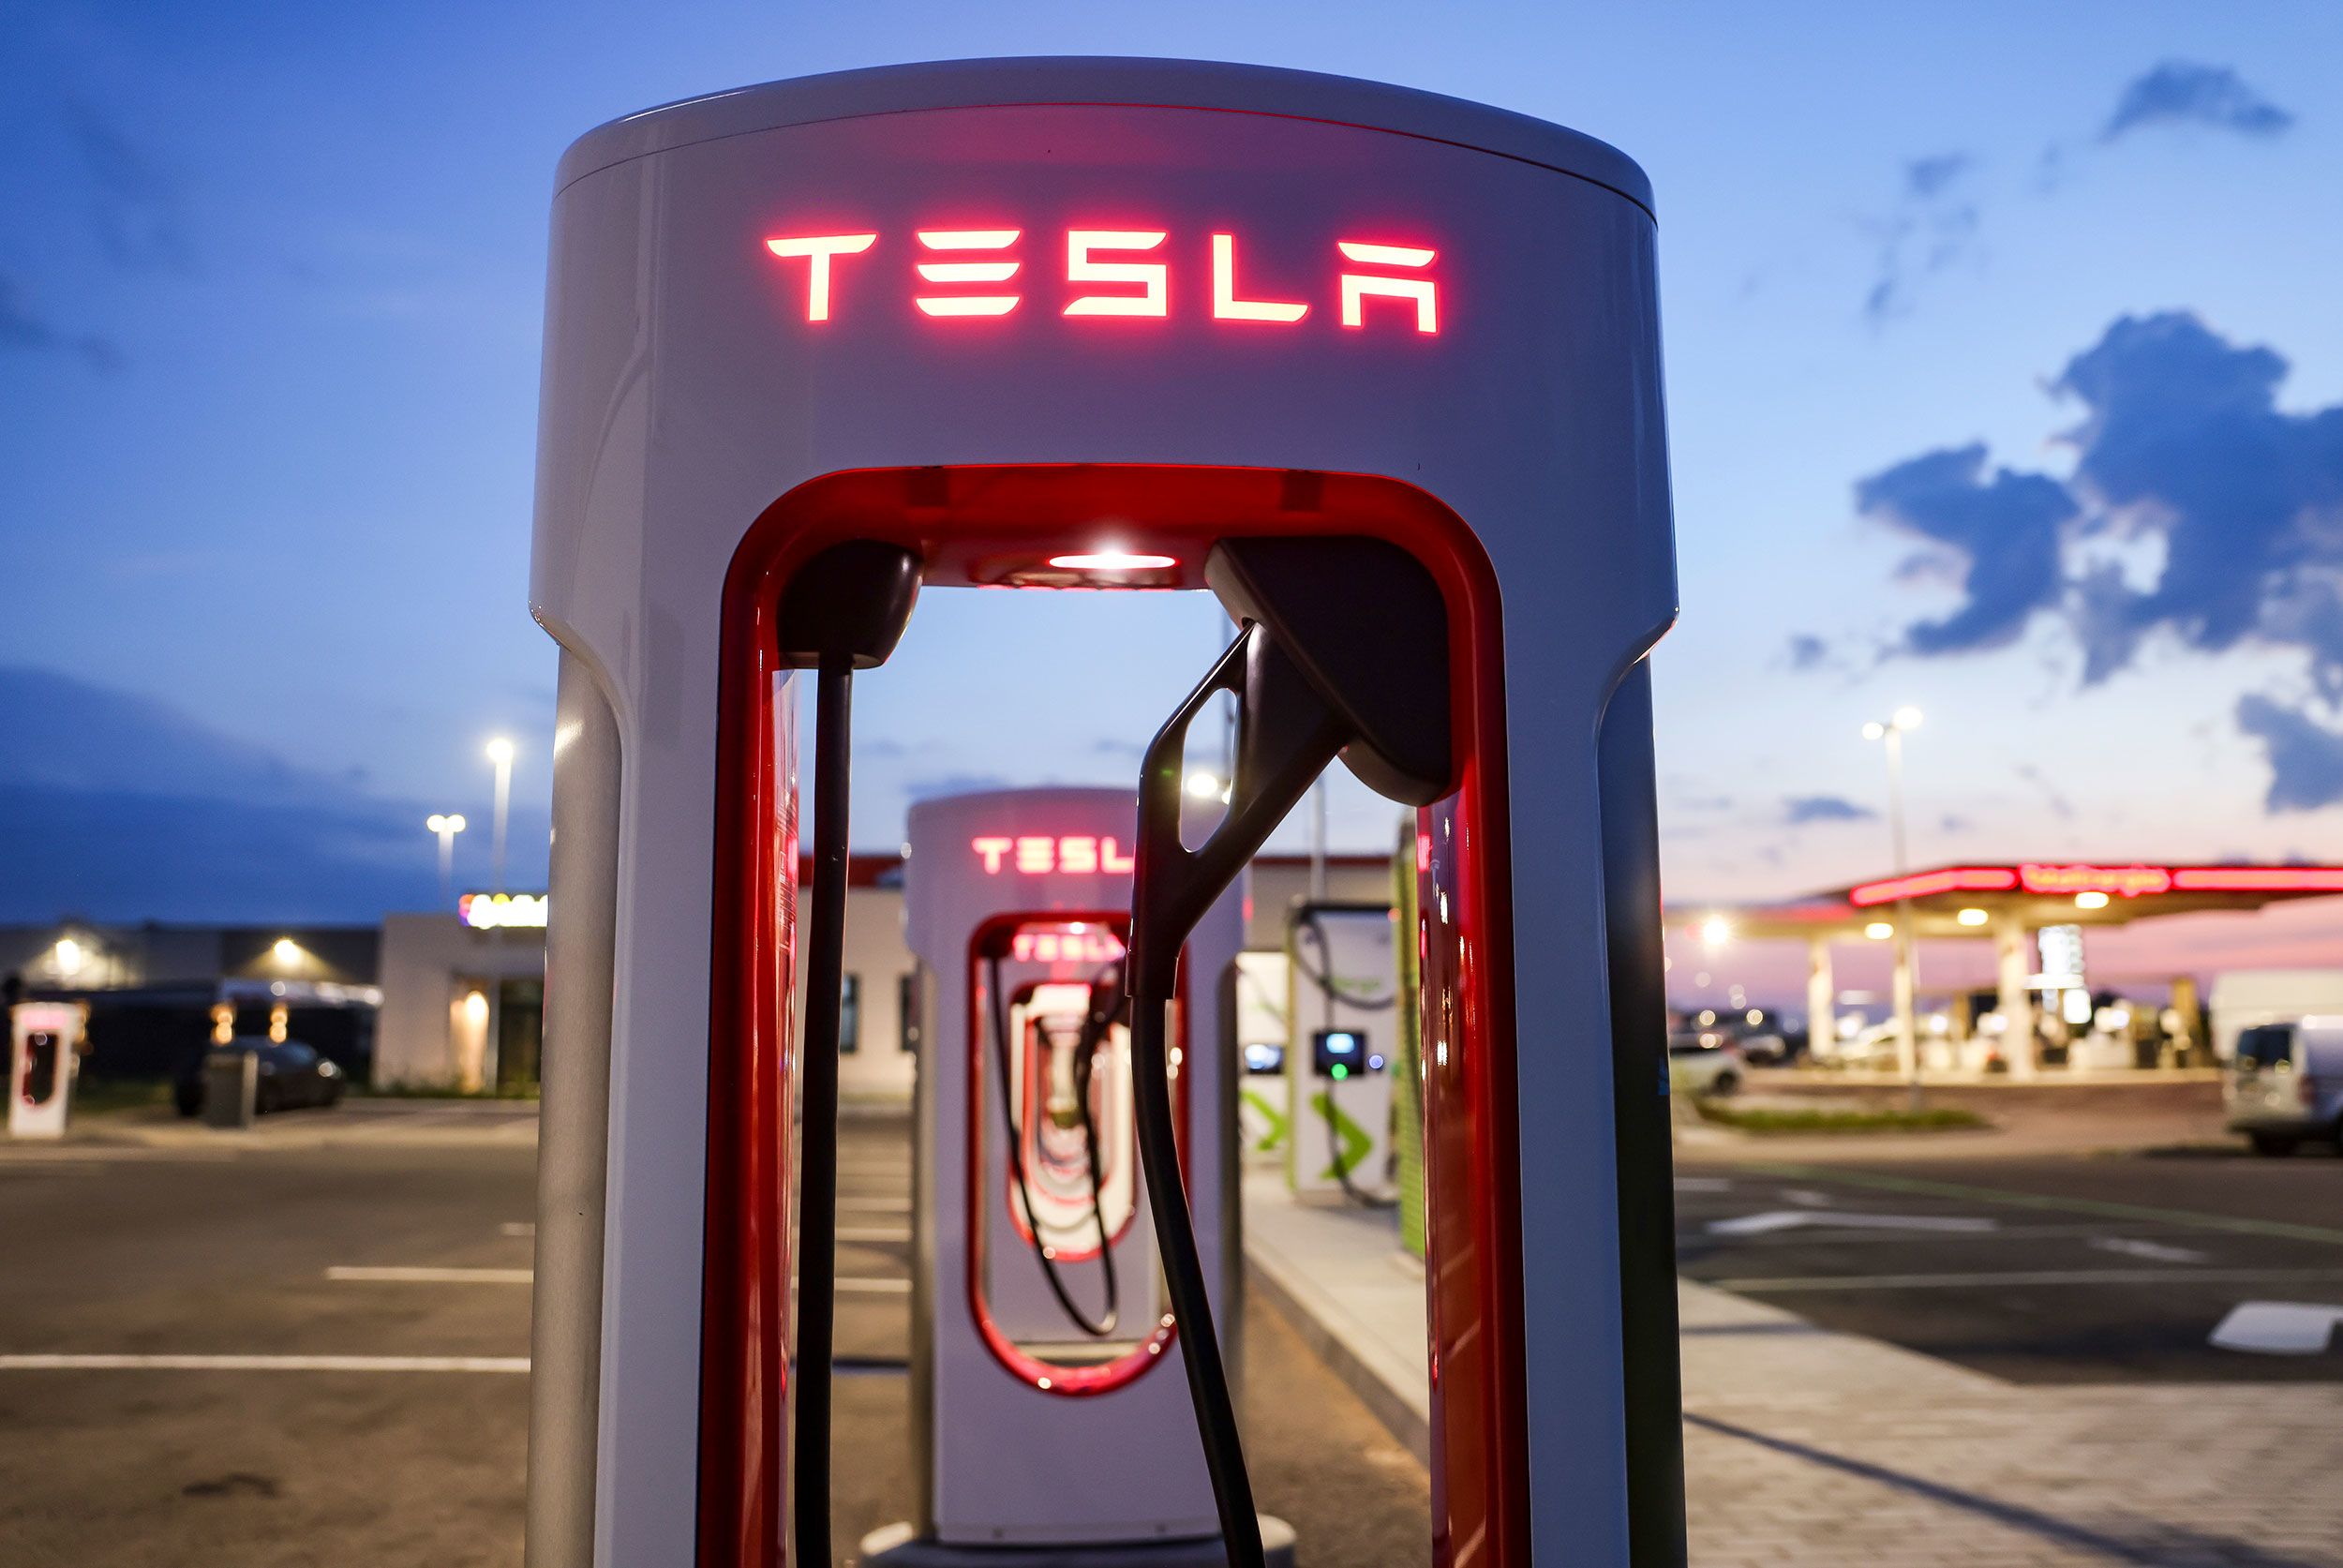 Tesla Opens Up Its Charging Connectors To All, But The World